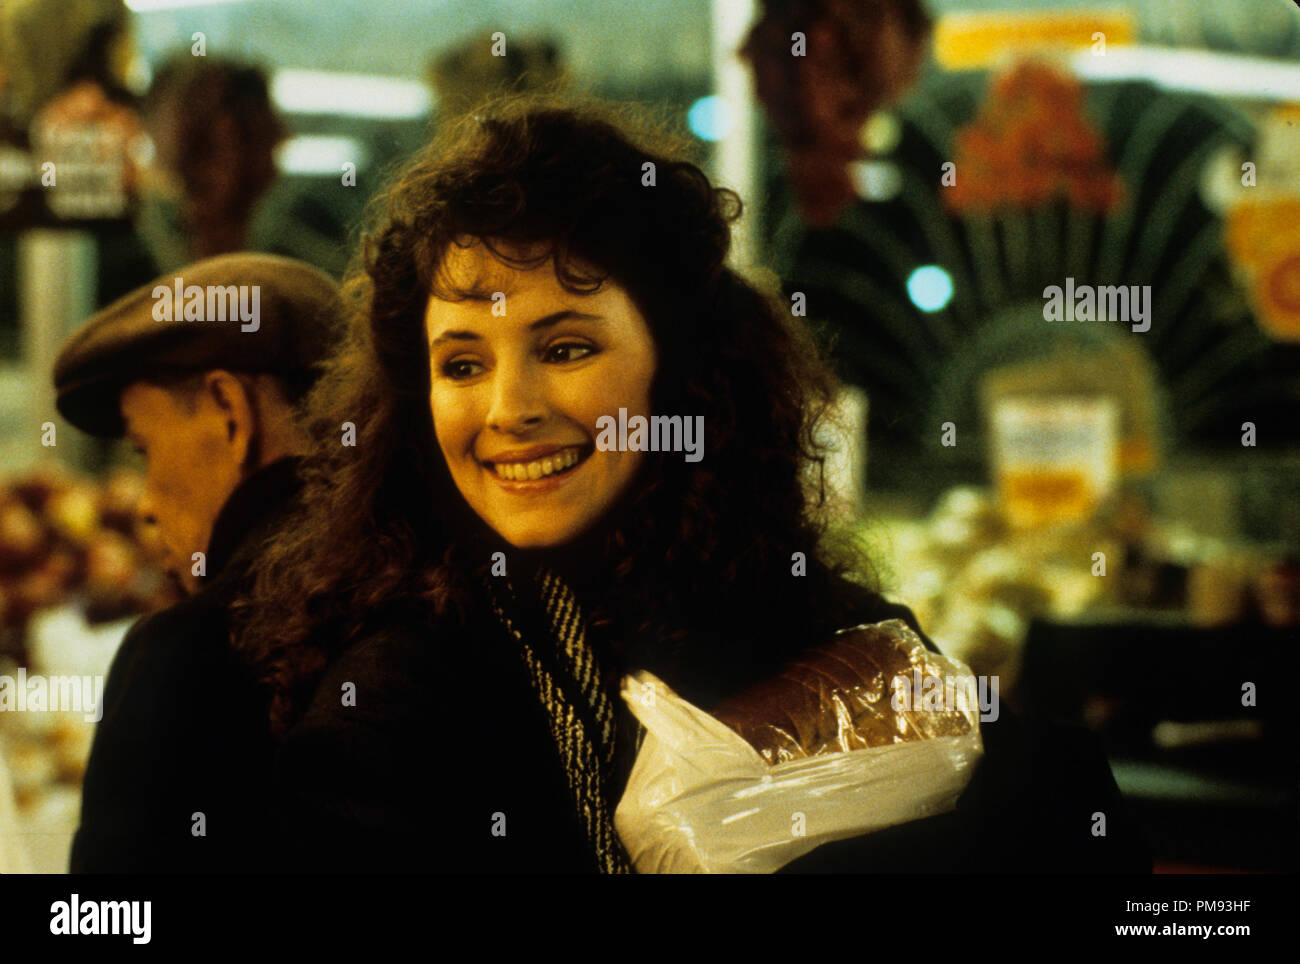 Studio Publicity Still from 'Stakeout' Madeleine Stowe © 1987 Touchstone Pictures    All Rights Reserved   File Reference # 31697094THA  For Editorial Use Only Stock Photo